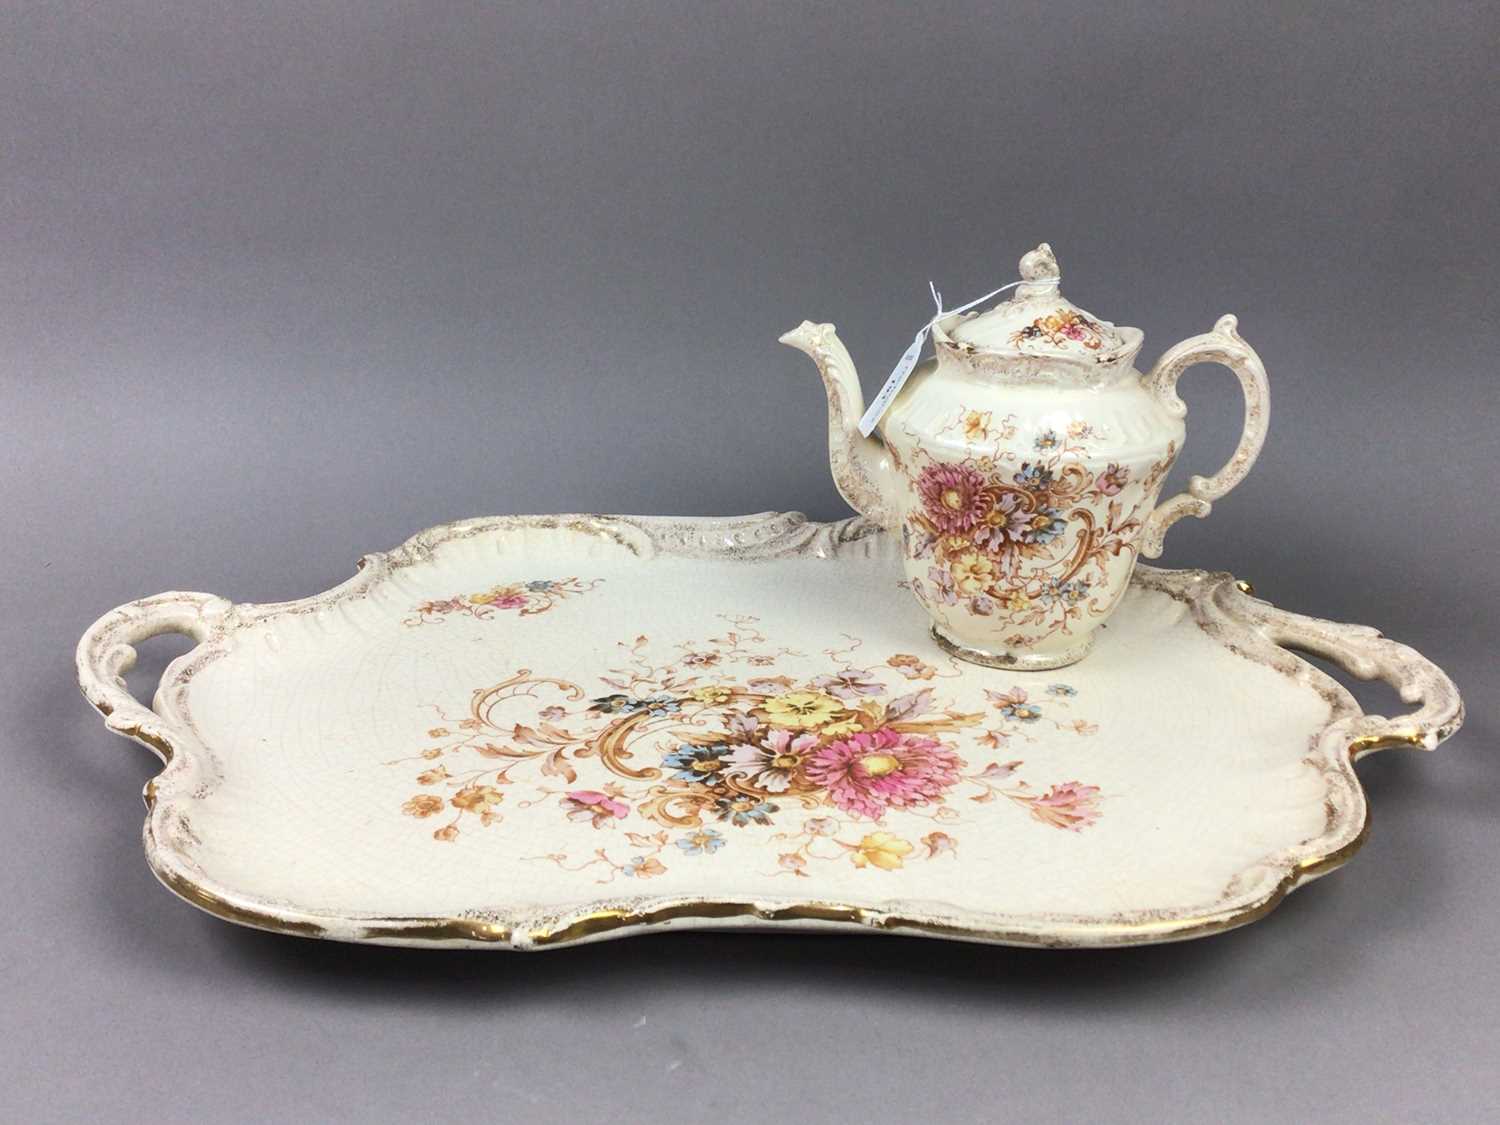 A LATE VICTORIAN S FIELDING & CO STONEWARE CABARET SERVES PATTERN TEA SERVICE - Image 3 of 3